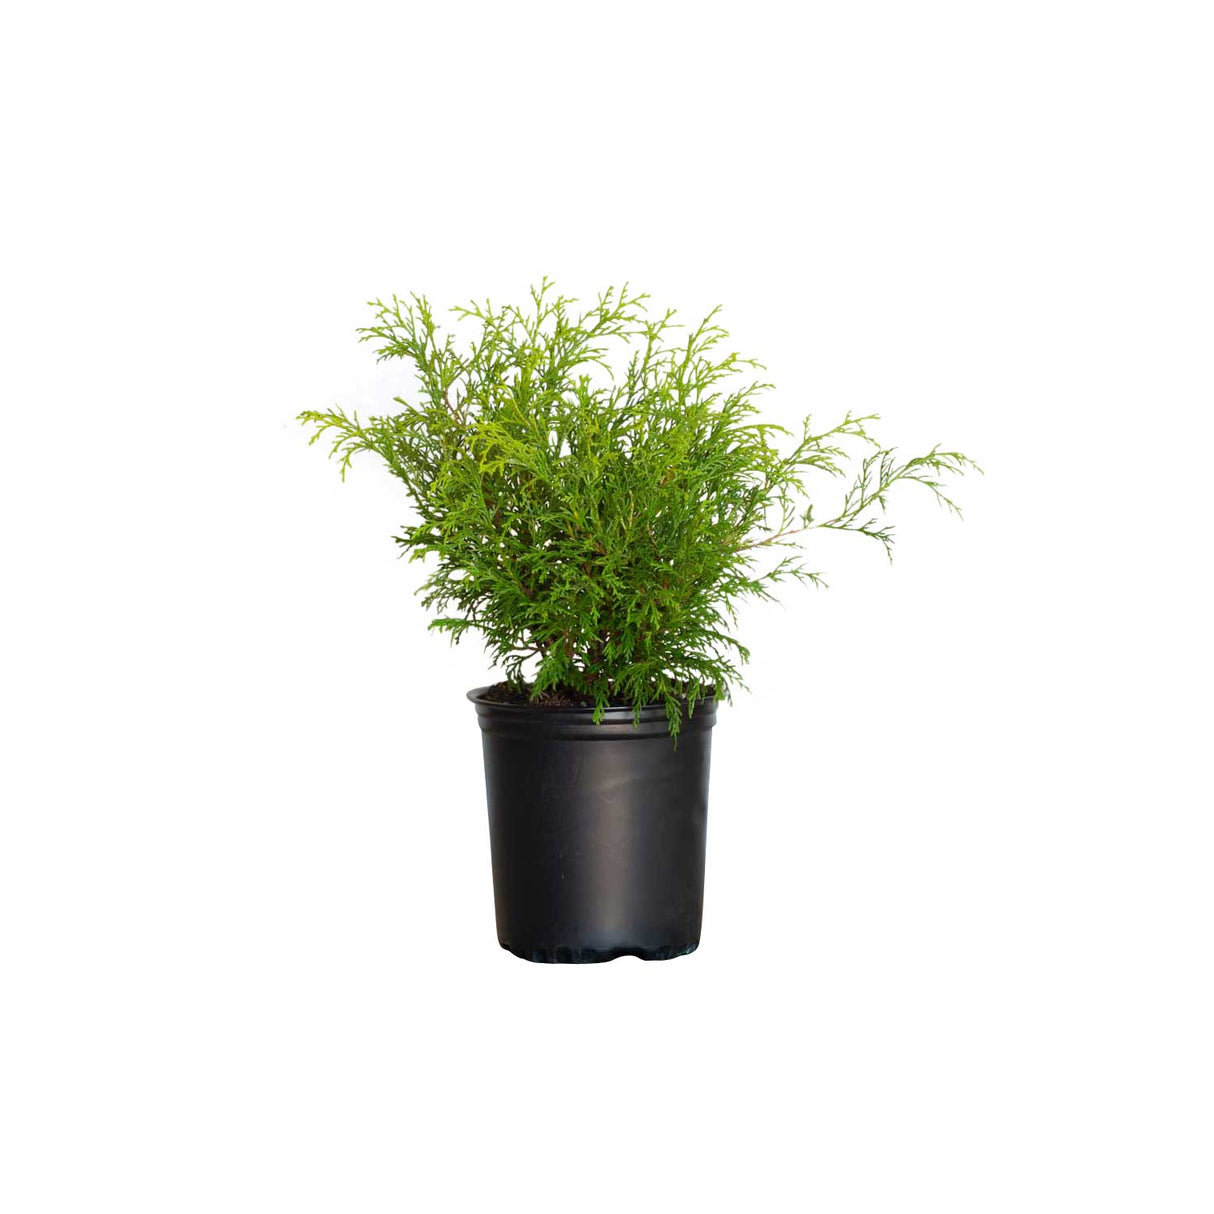 2.5 Quart Gold Mop False Chamaecyparis for sale with bright yellow foliage in a black nursery pot on a white background